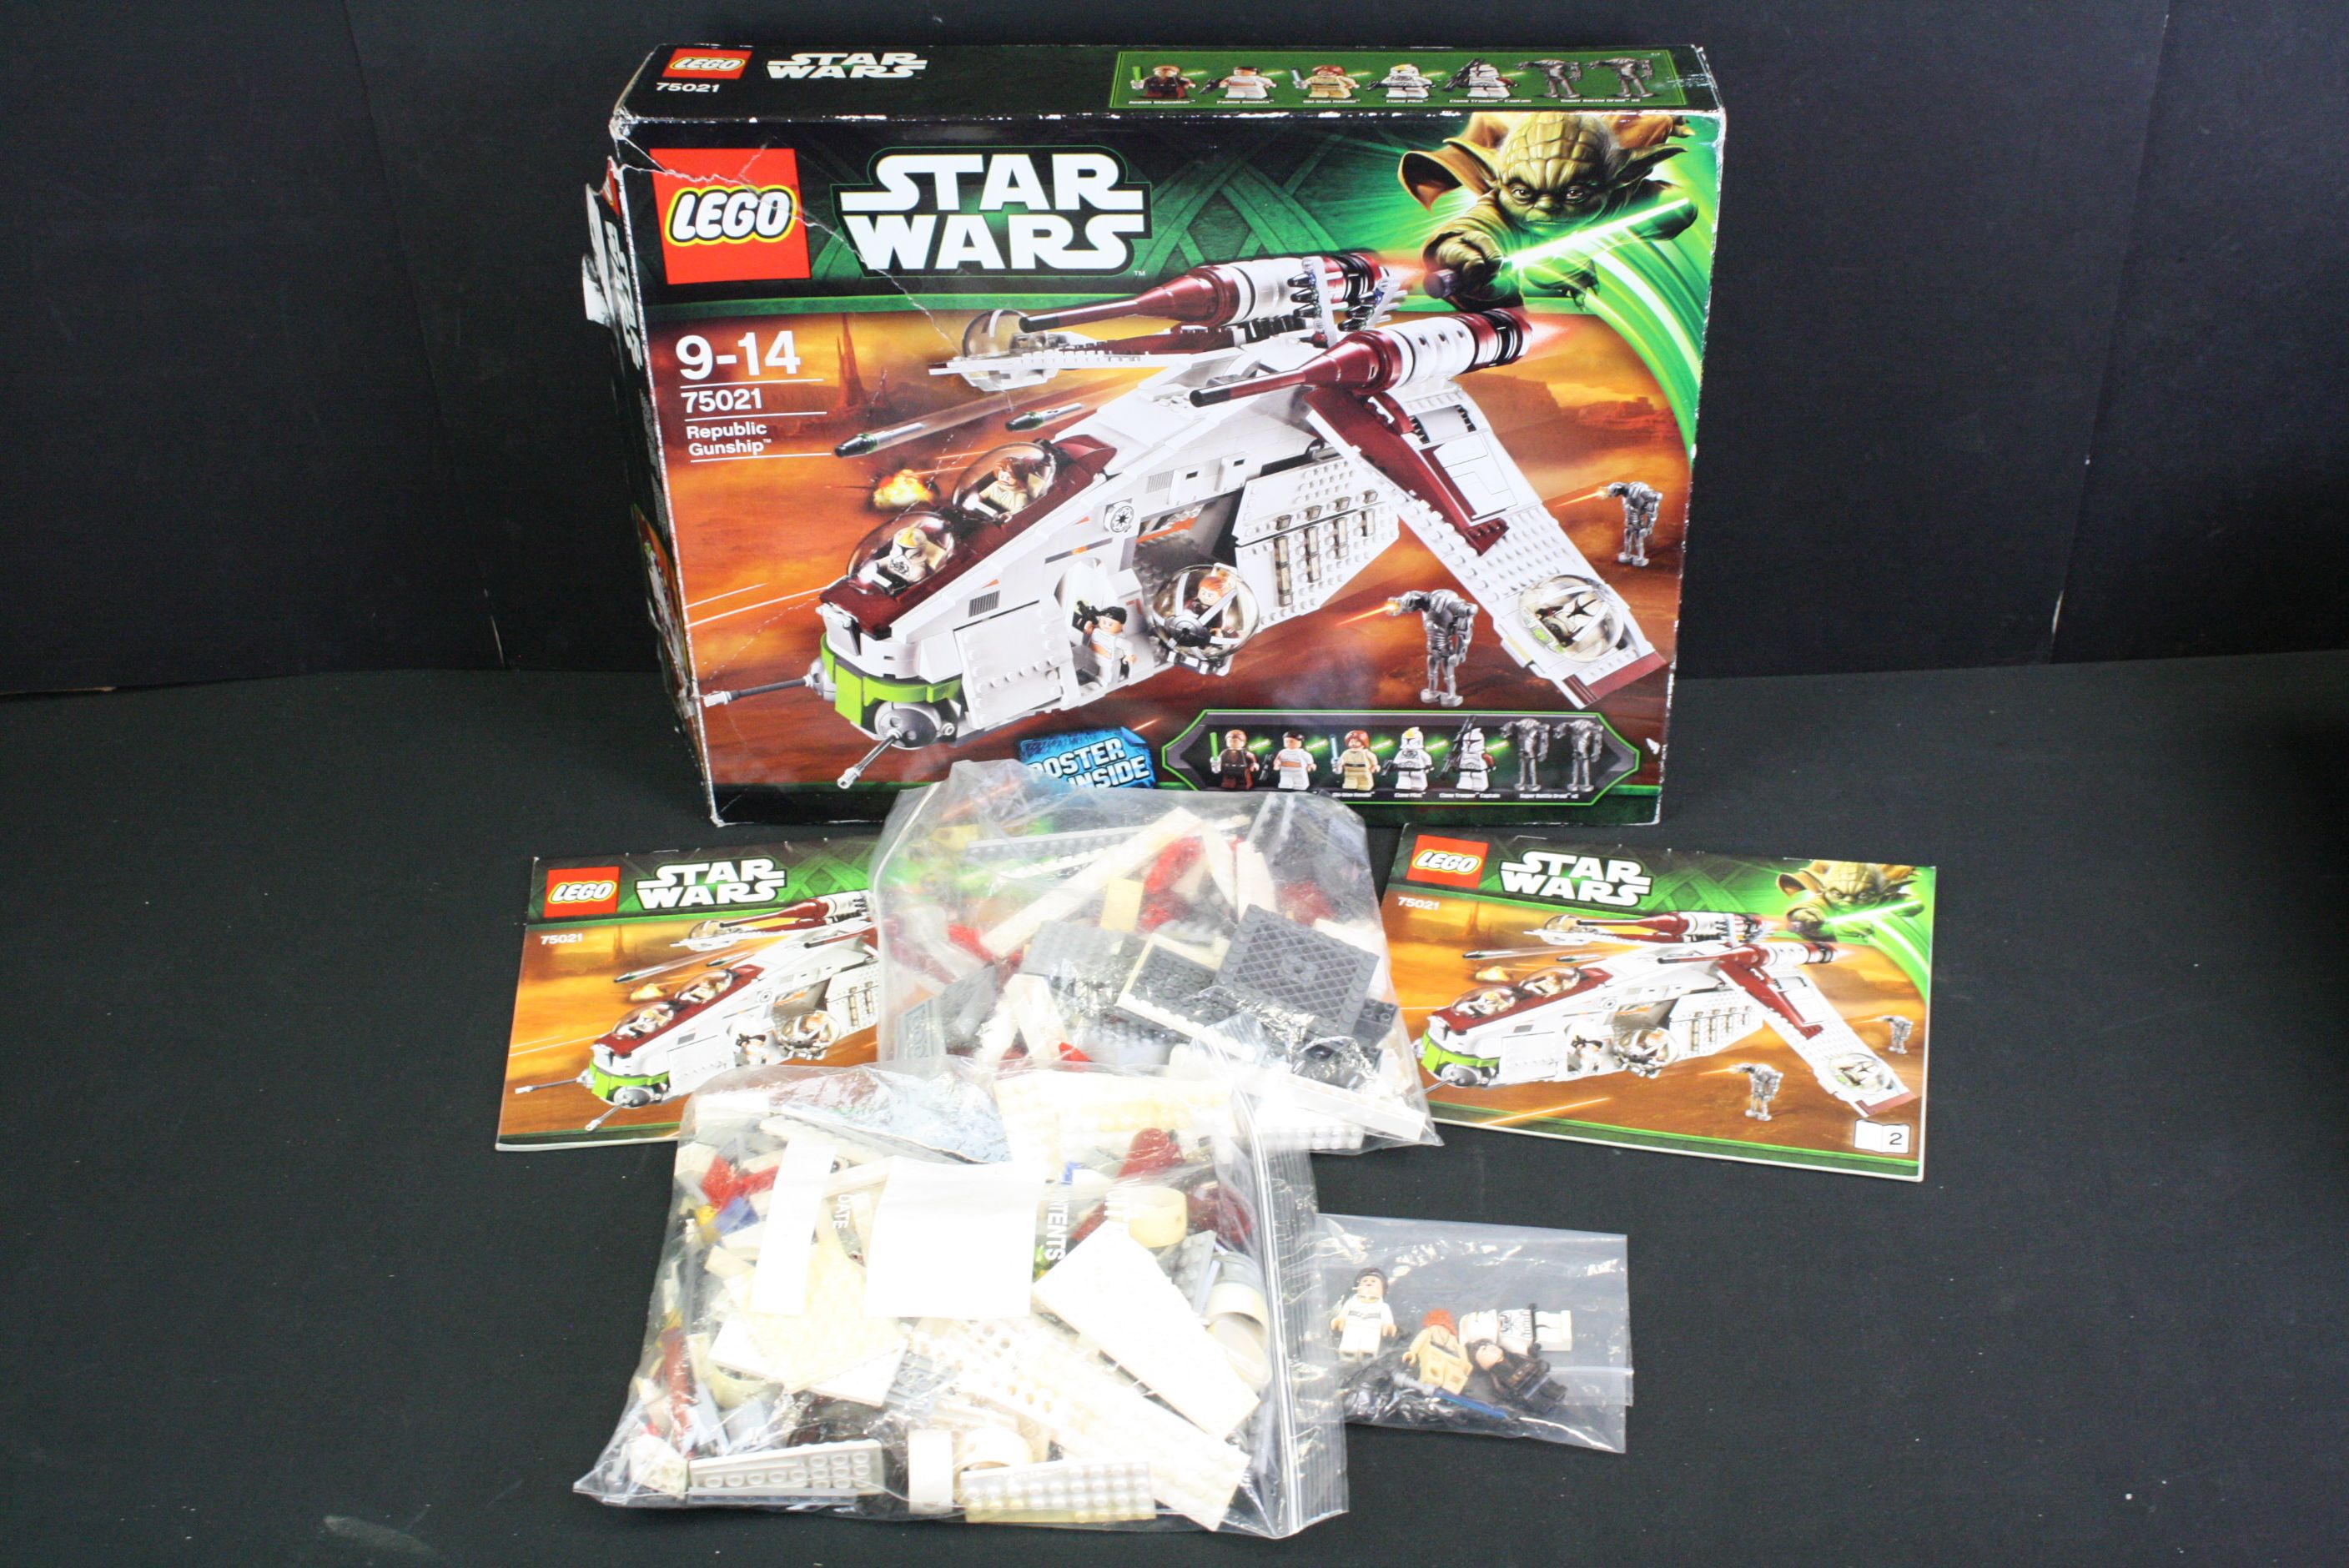 Lego - Four boxed Lego Star Wars sets to include 75021 Republic Gunship, 75054 AT-AT, 7877 Naboo - Bild 3 aus 23